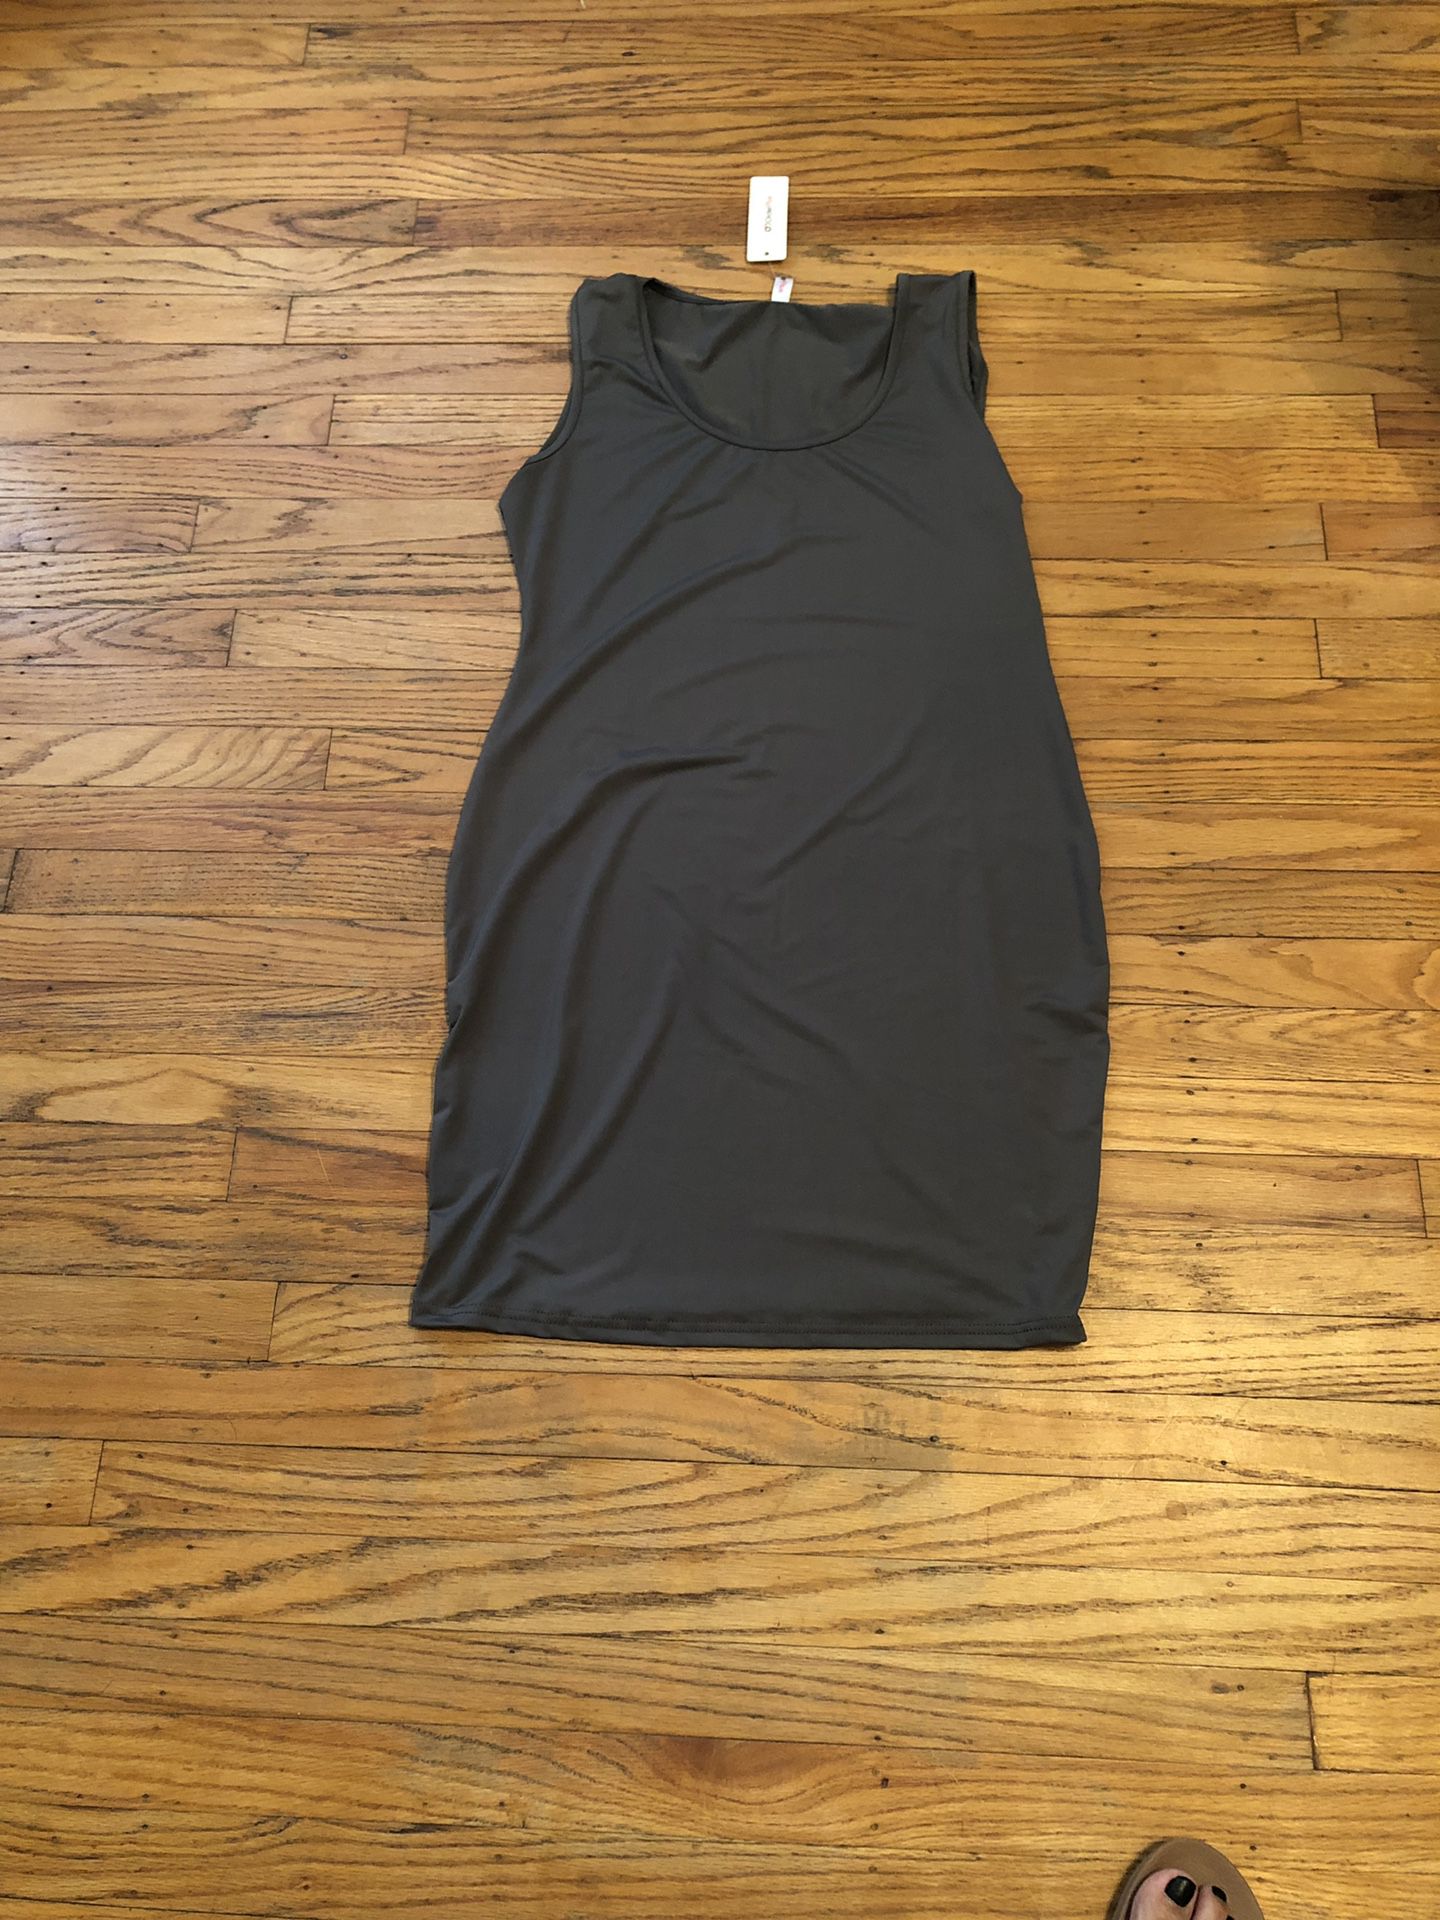 New without tags large maternity tank dress gray